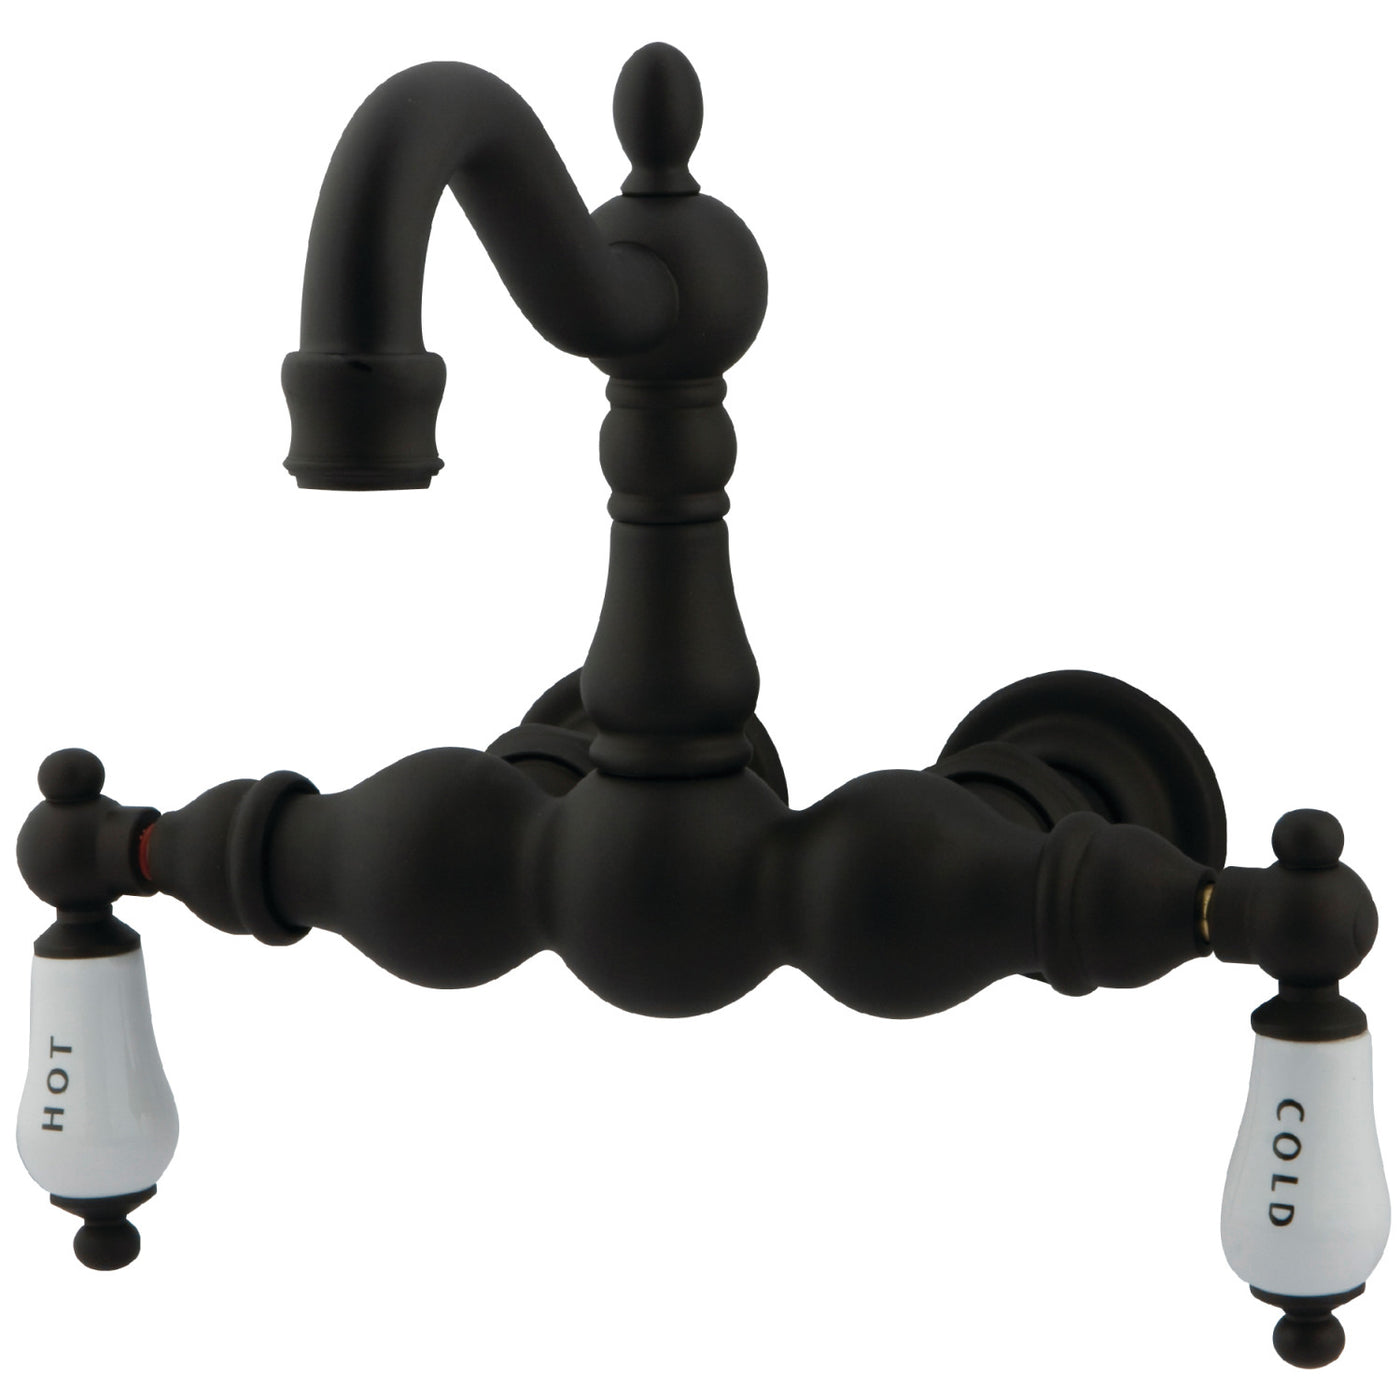 Elements of Design DT10015CL 3-3/8-Inch Wall Mount Tub Faucet, Oil Rubbed Bronze